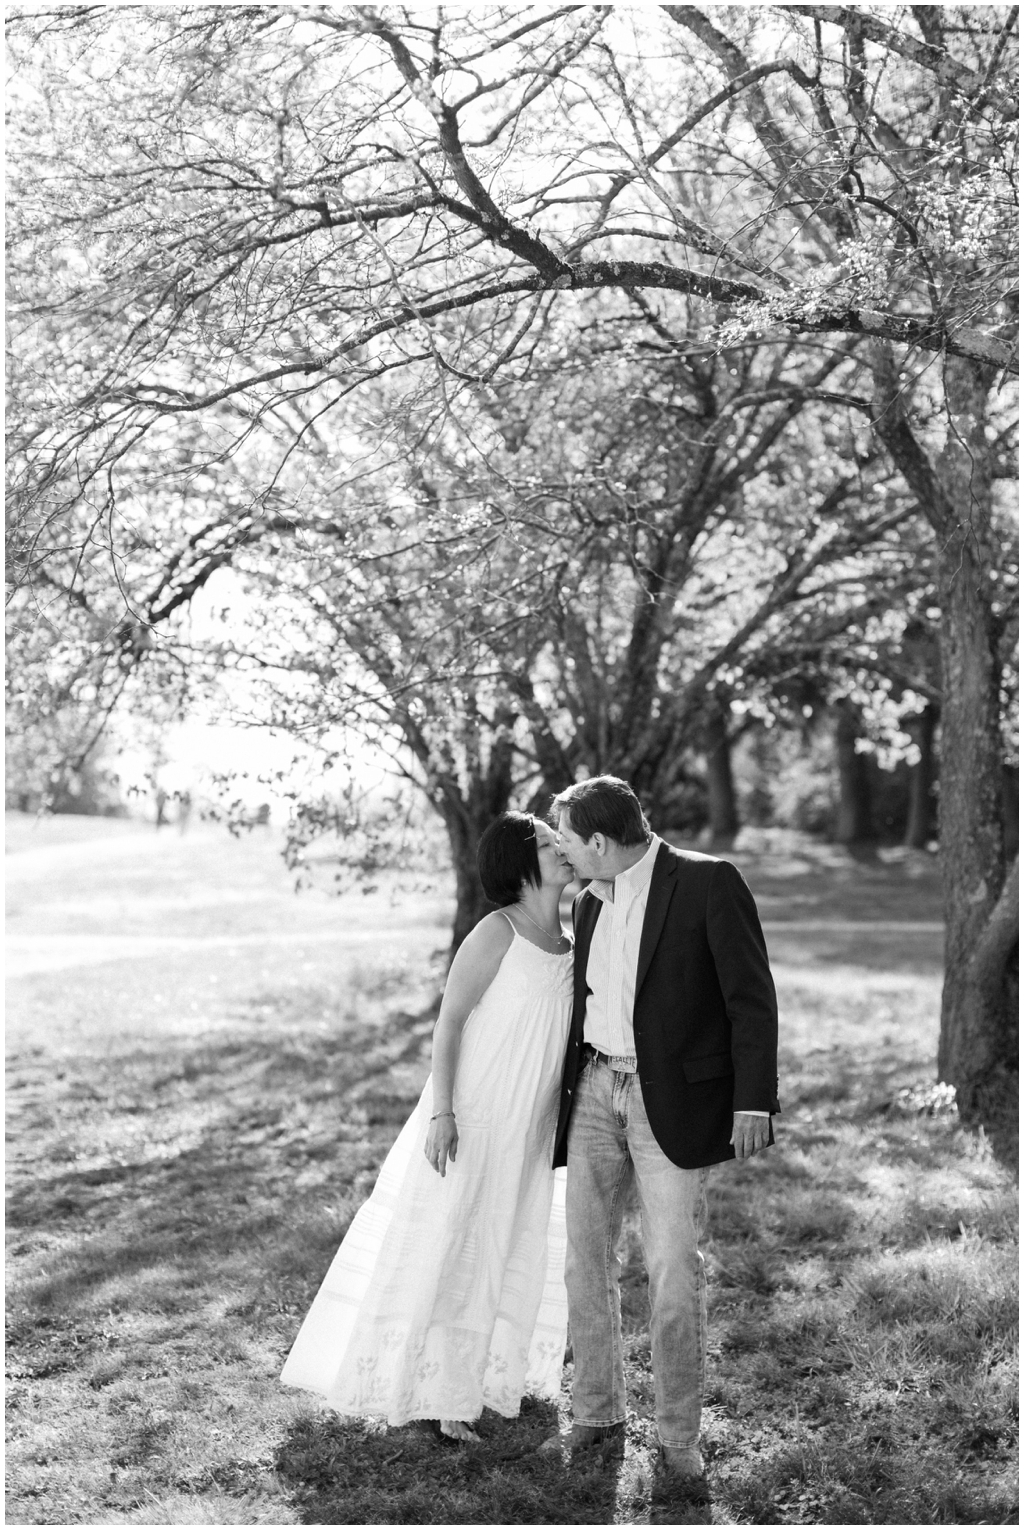 Classic black and white image from an engagement session at the Knoxville Botanical Gardens. Image by Holly Michon Photography